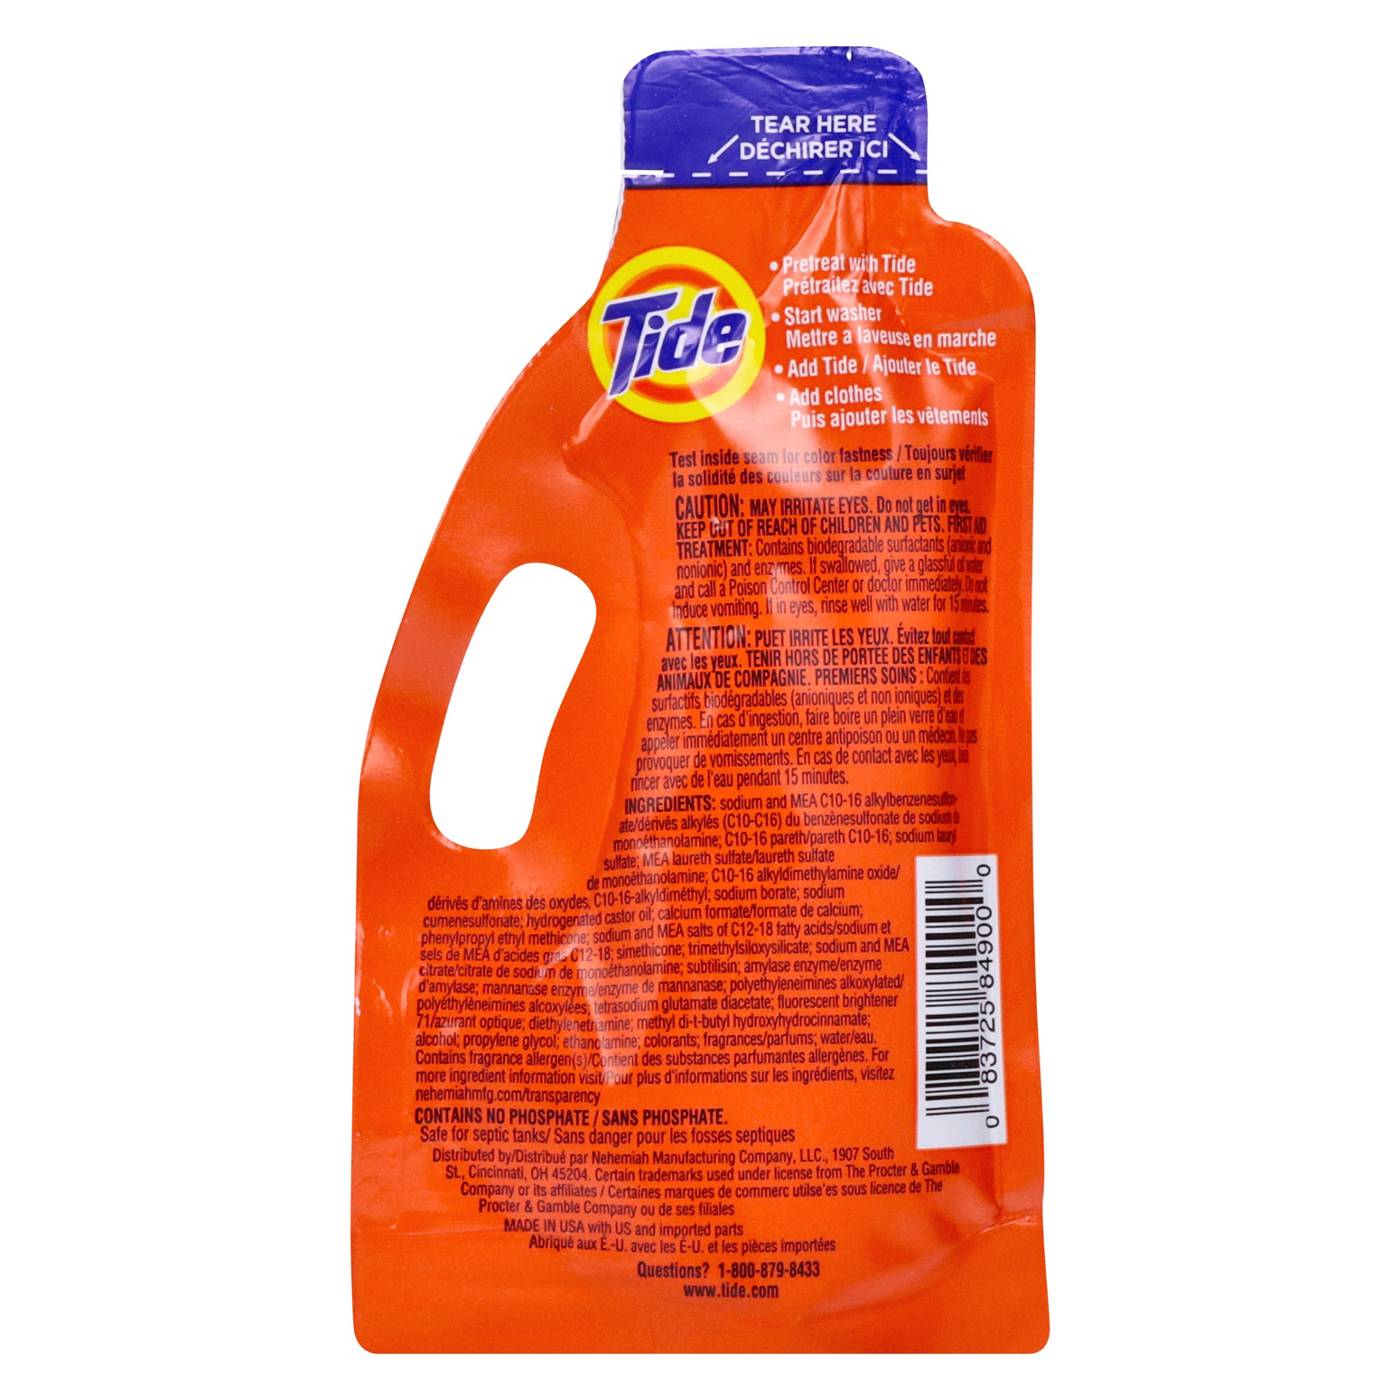 TIDE Travel Size One Load Liquid Laundry Detergent; image 2 of 2